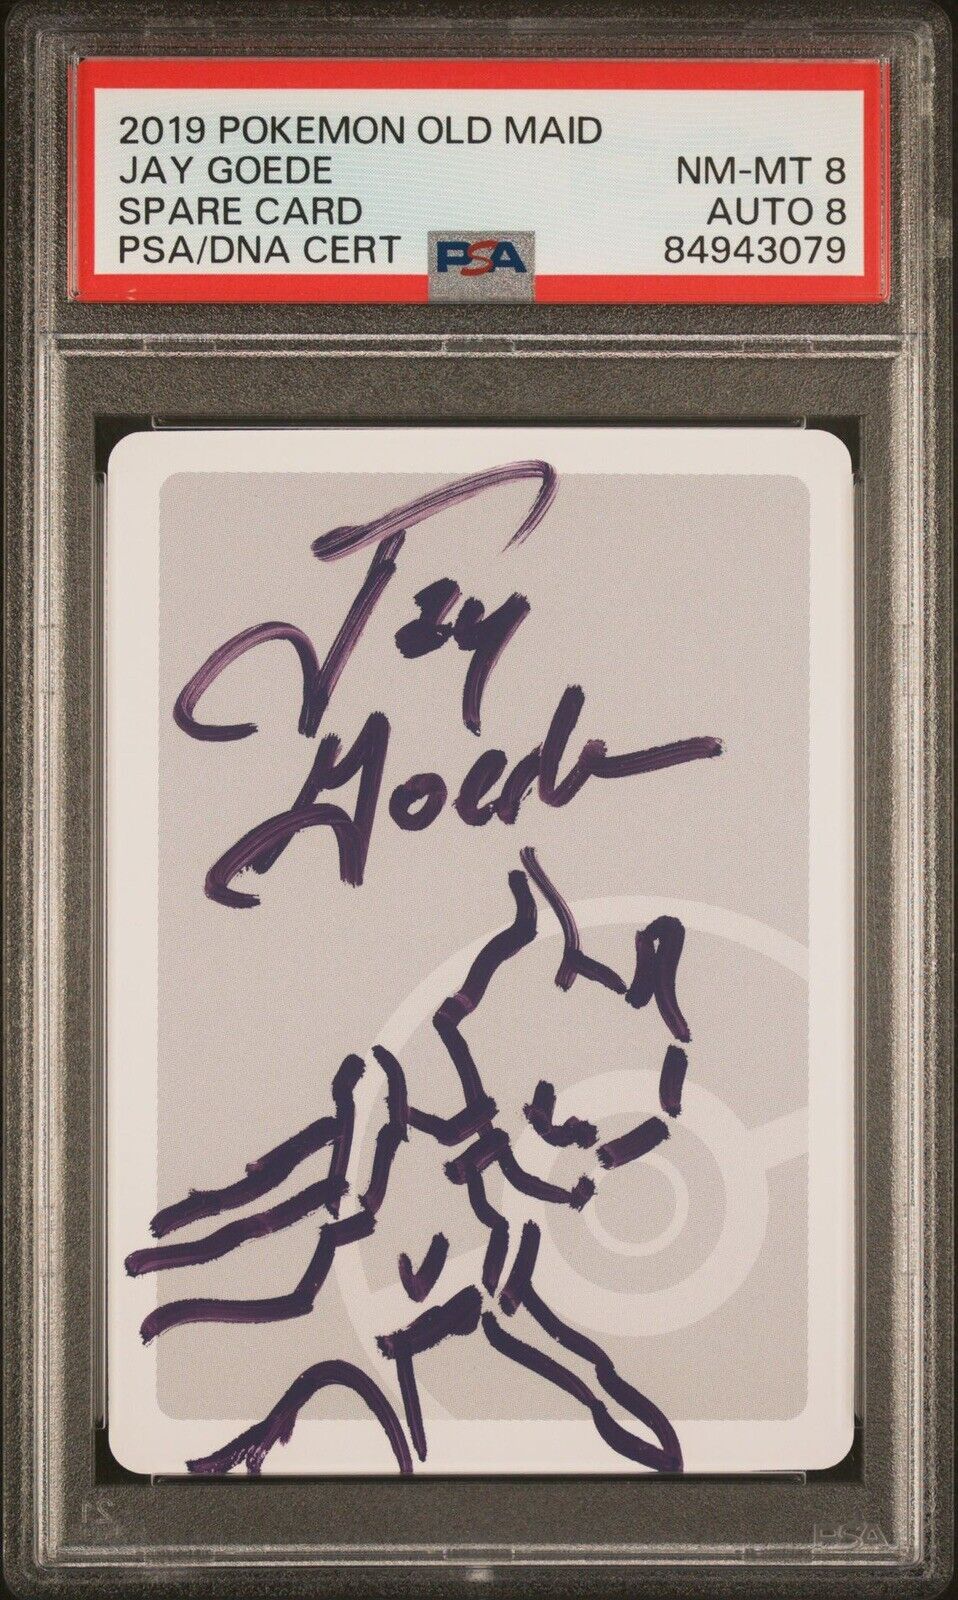 2019 Pokemon Old Maid Japanese Spare Card SIGNED AUTO 8 JAY GOEDE PSA 8 NM MT